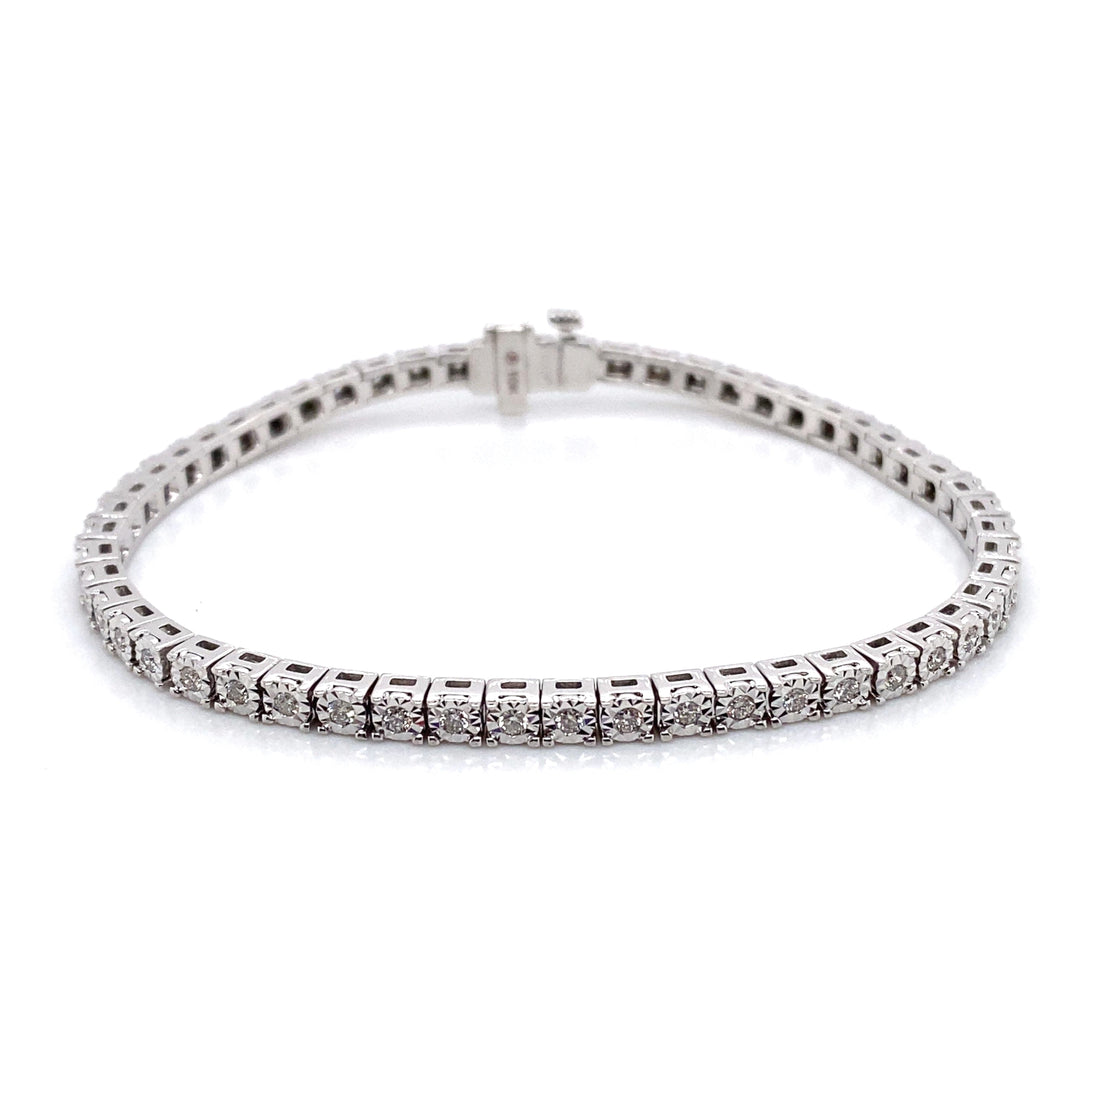 Real Diamond Tennis Bracelet 10.00 Ct 10k White Gold D VVS2 for Her for Him  Certified Appraised Round Cut Hand Made - Etsy